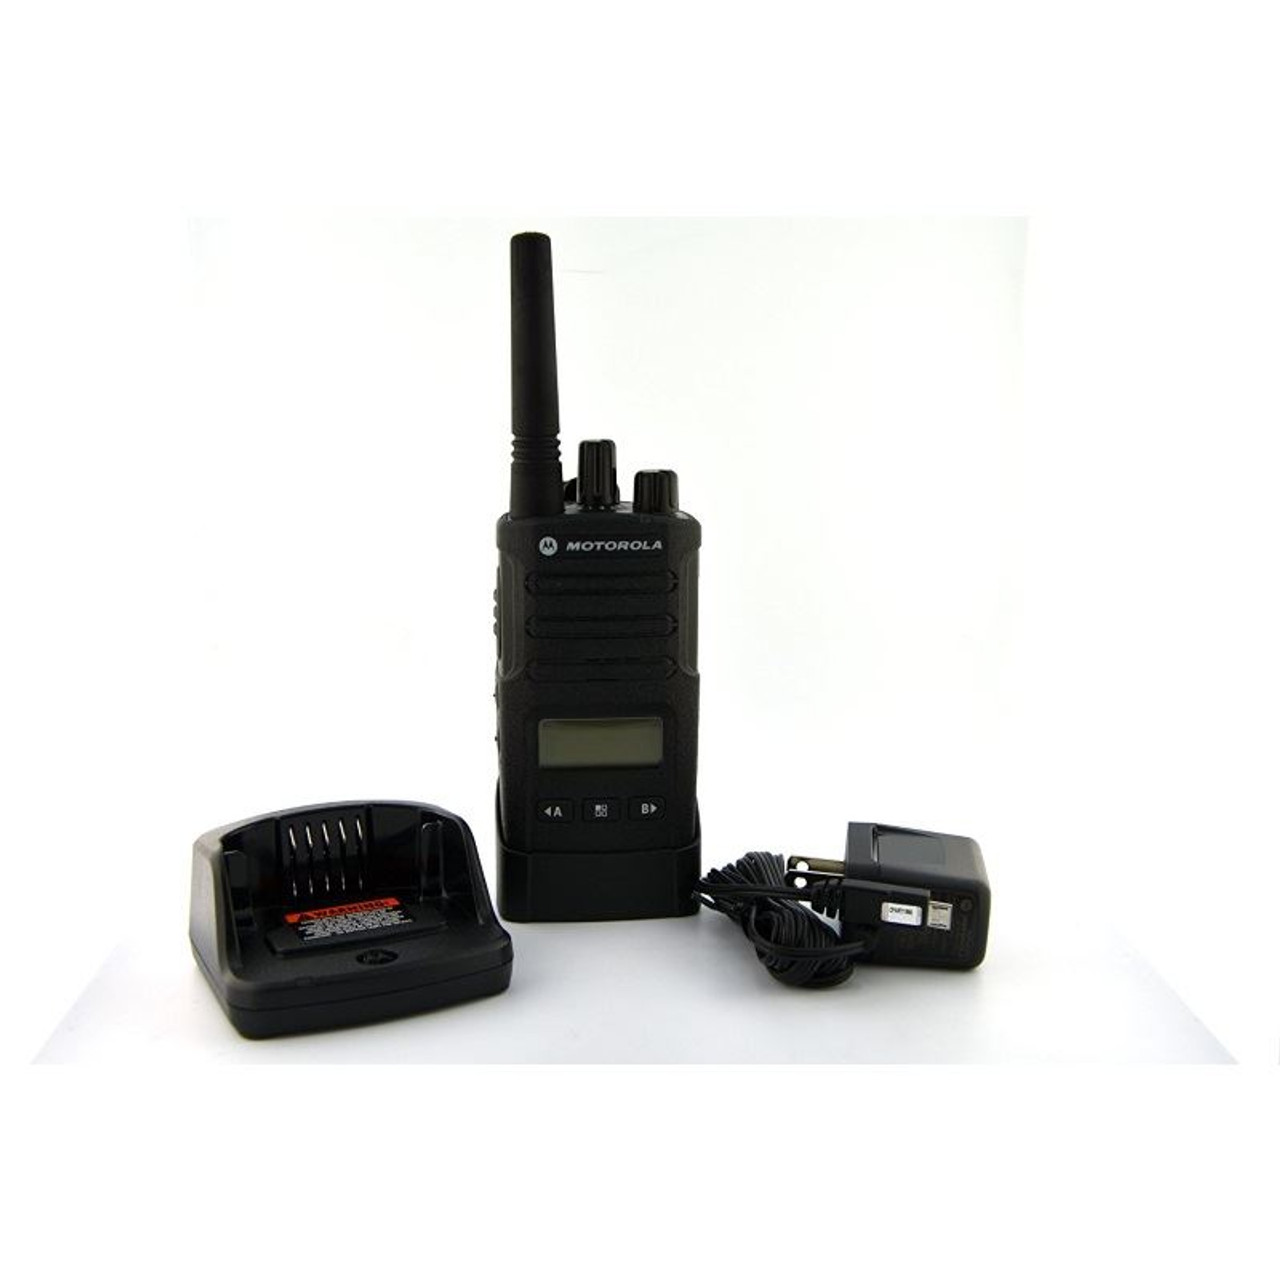 Motorola RMU2080D with built in Display and NOAA alerts is the one to get  for most warehouse and retail stores that want an easy to use radio that is  durable